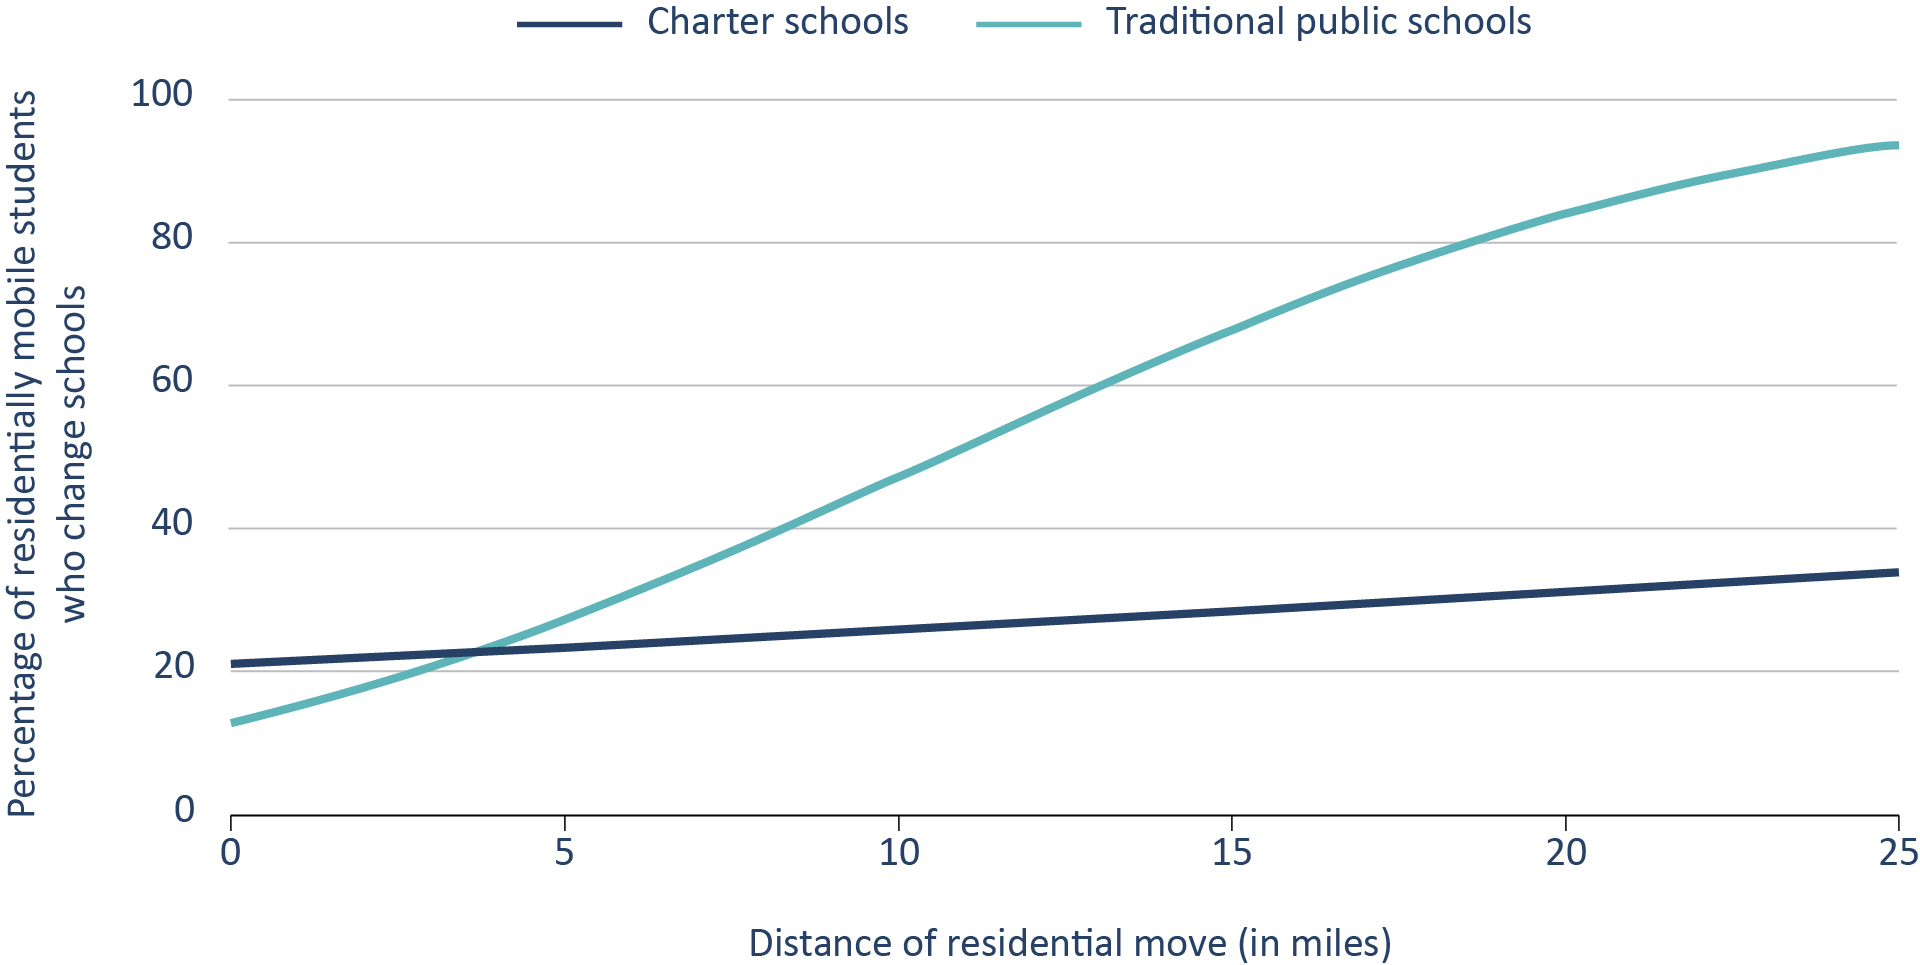 Figure A1: As the distance of the residential move increases, students in charter schools become less likely to change schools than those in traditional public schools.